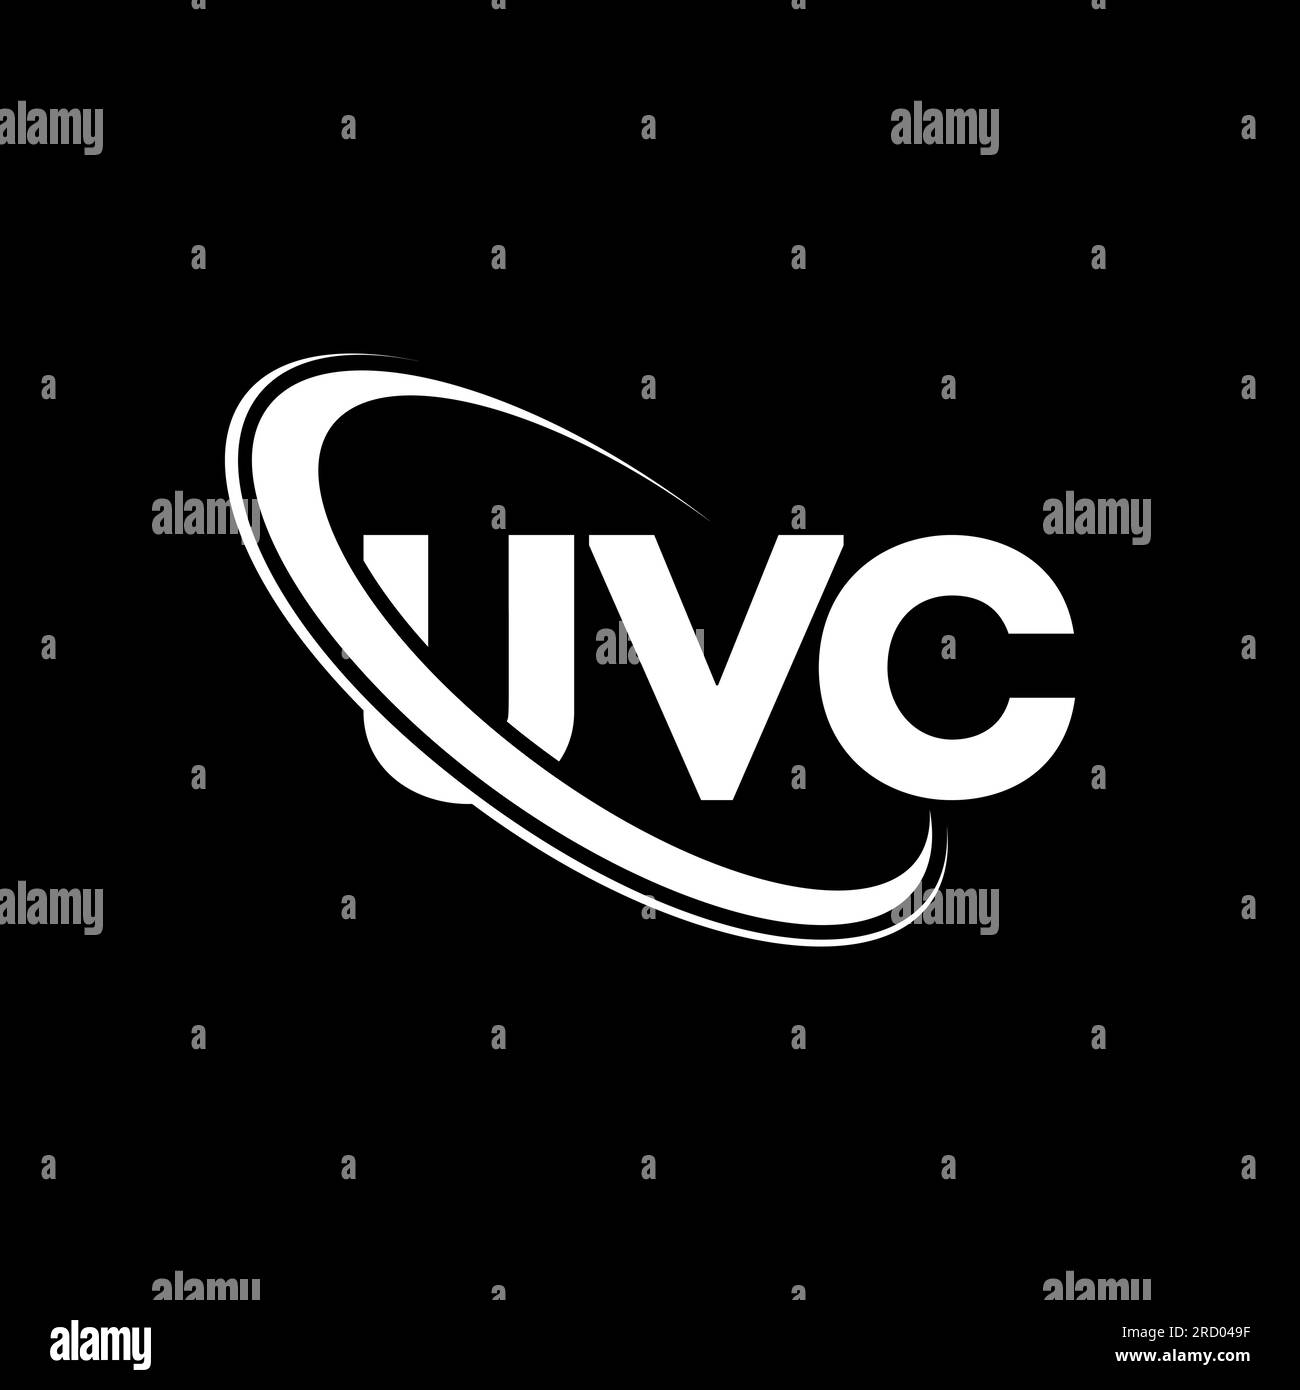 UVC logo. UVC letter. UVC letter logo design. Initials UVC logo linked with circle and uppercase monogram logo. UVC typography for technology, busines Stock Vector